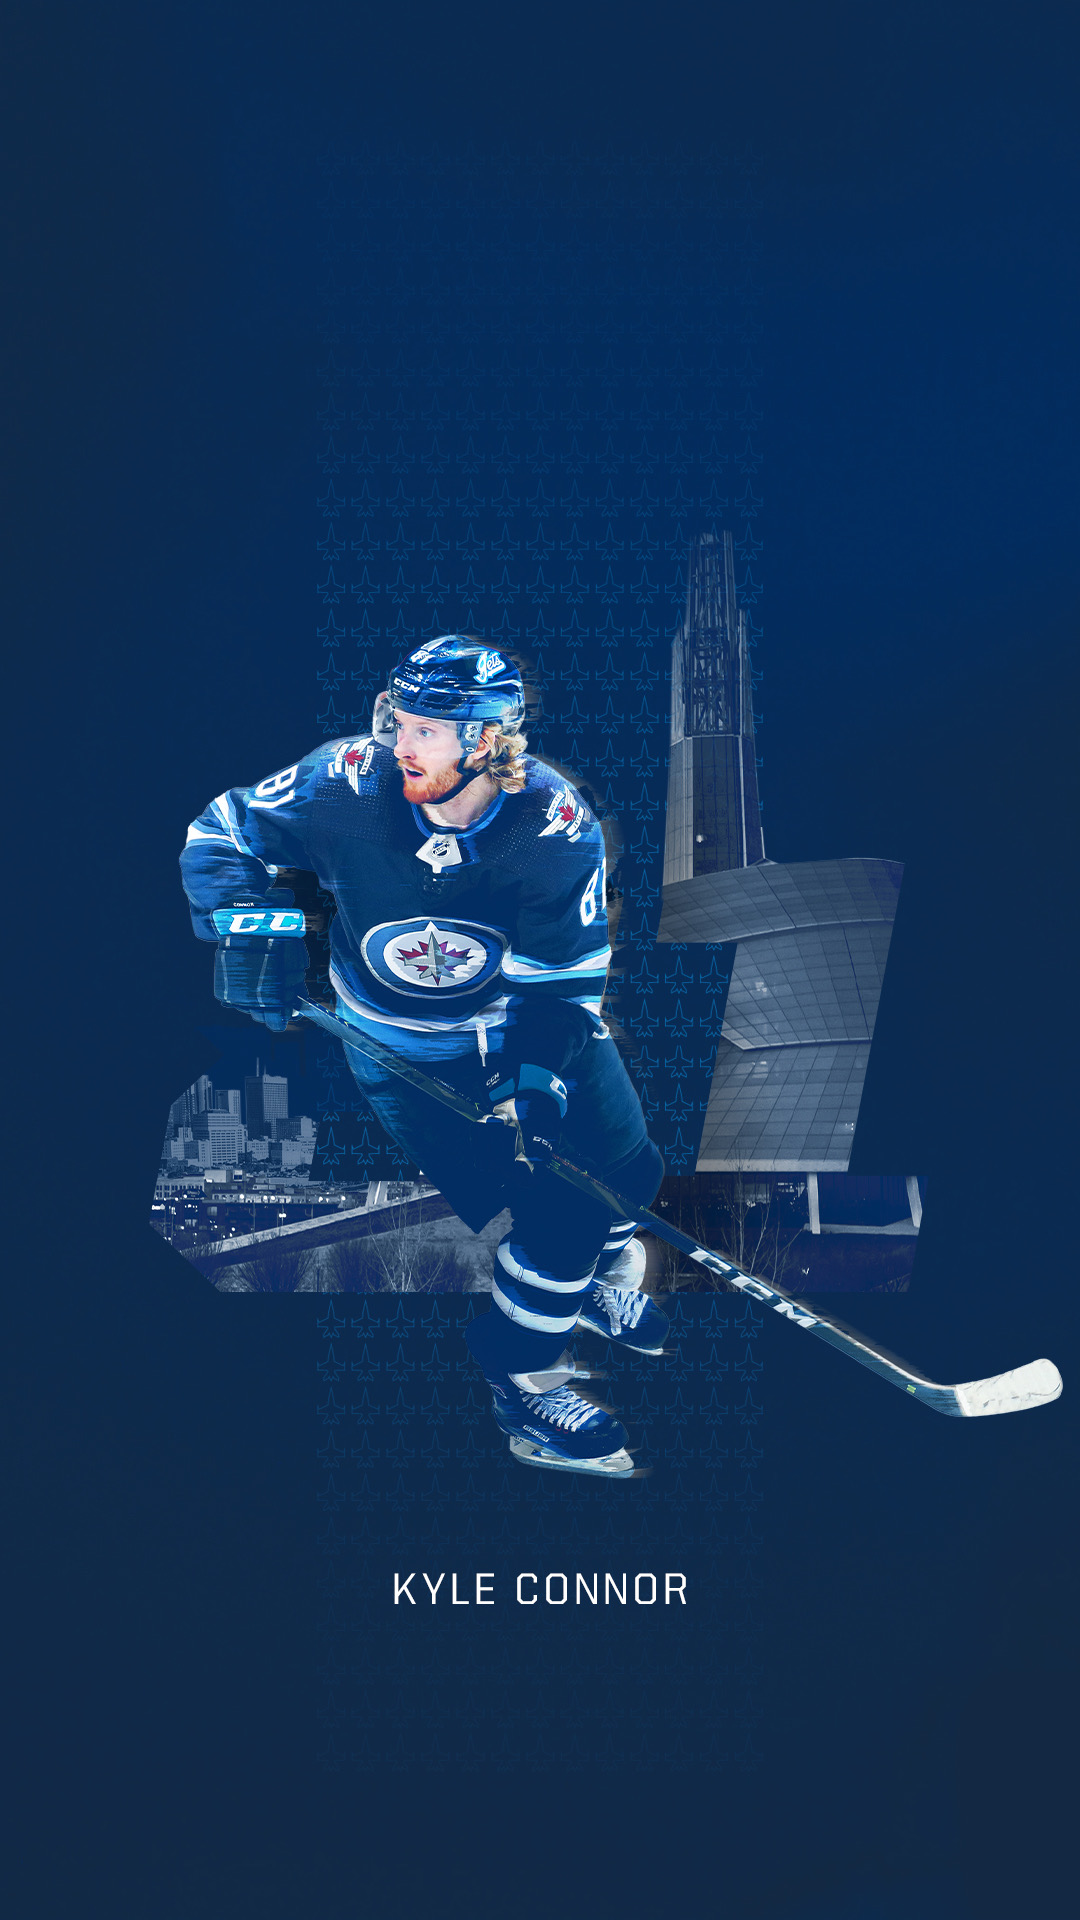 Winnipeg Jets on X: Winnipeg these wallpapers are for YOU